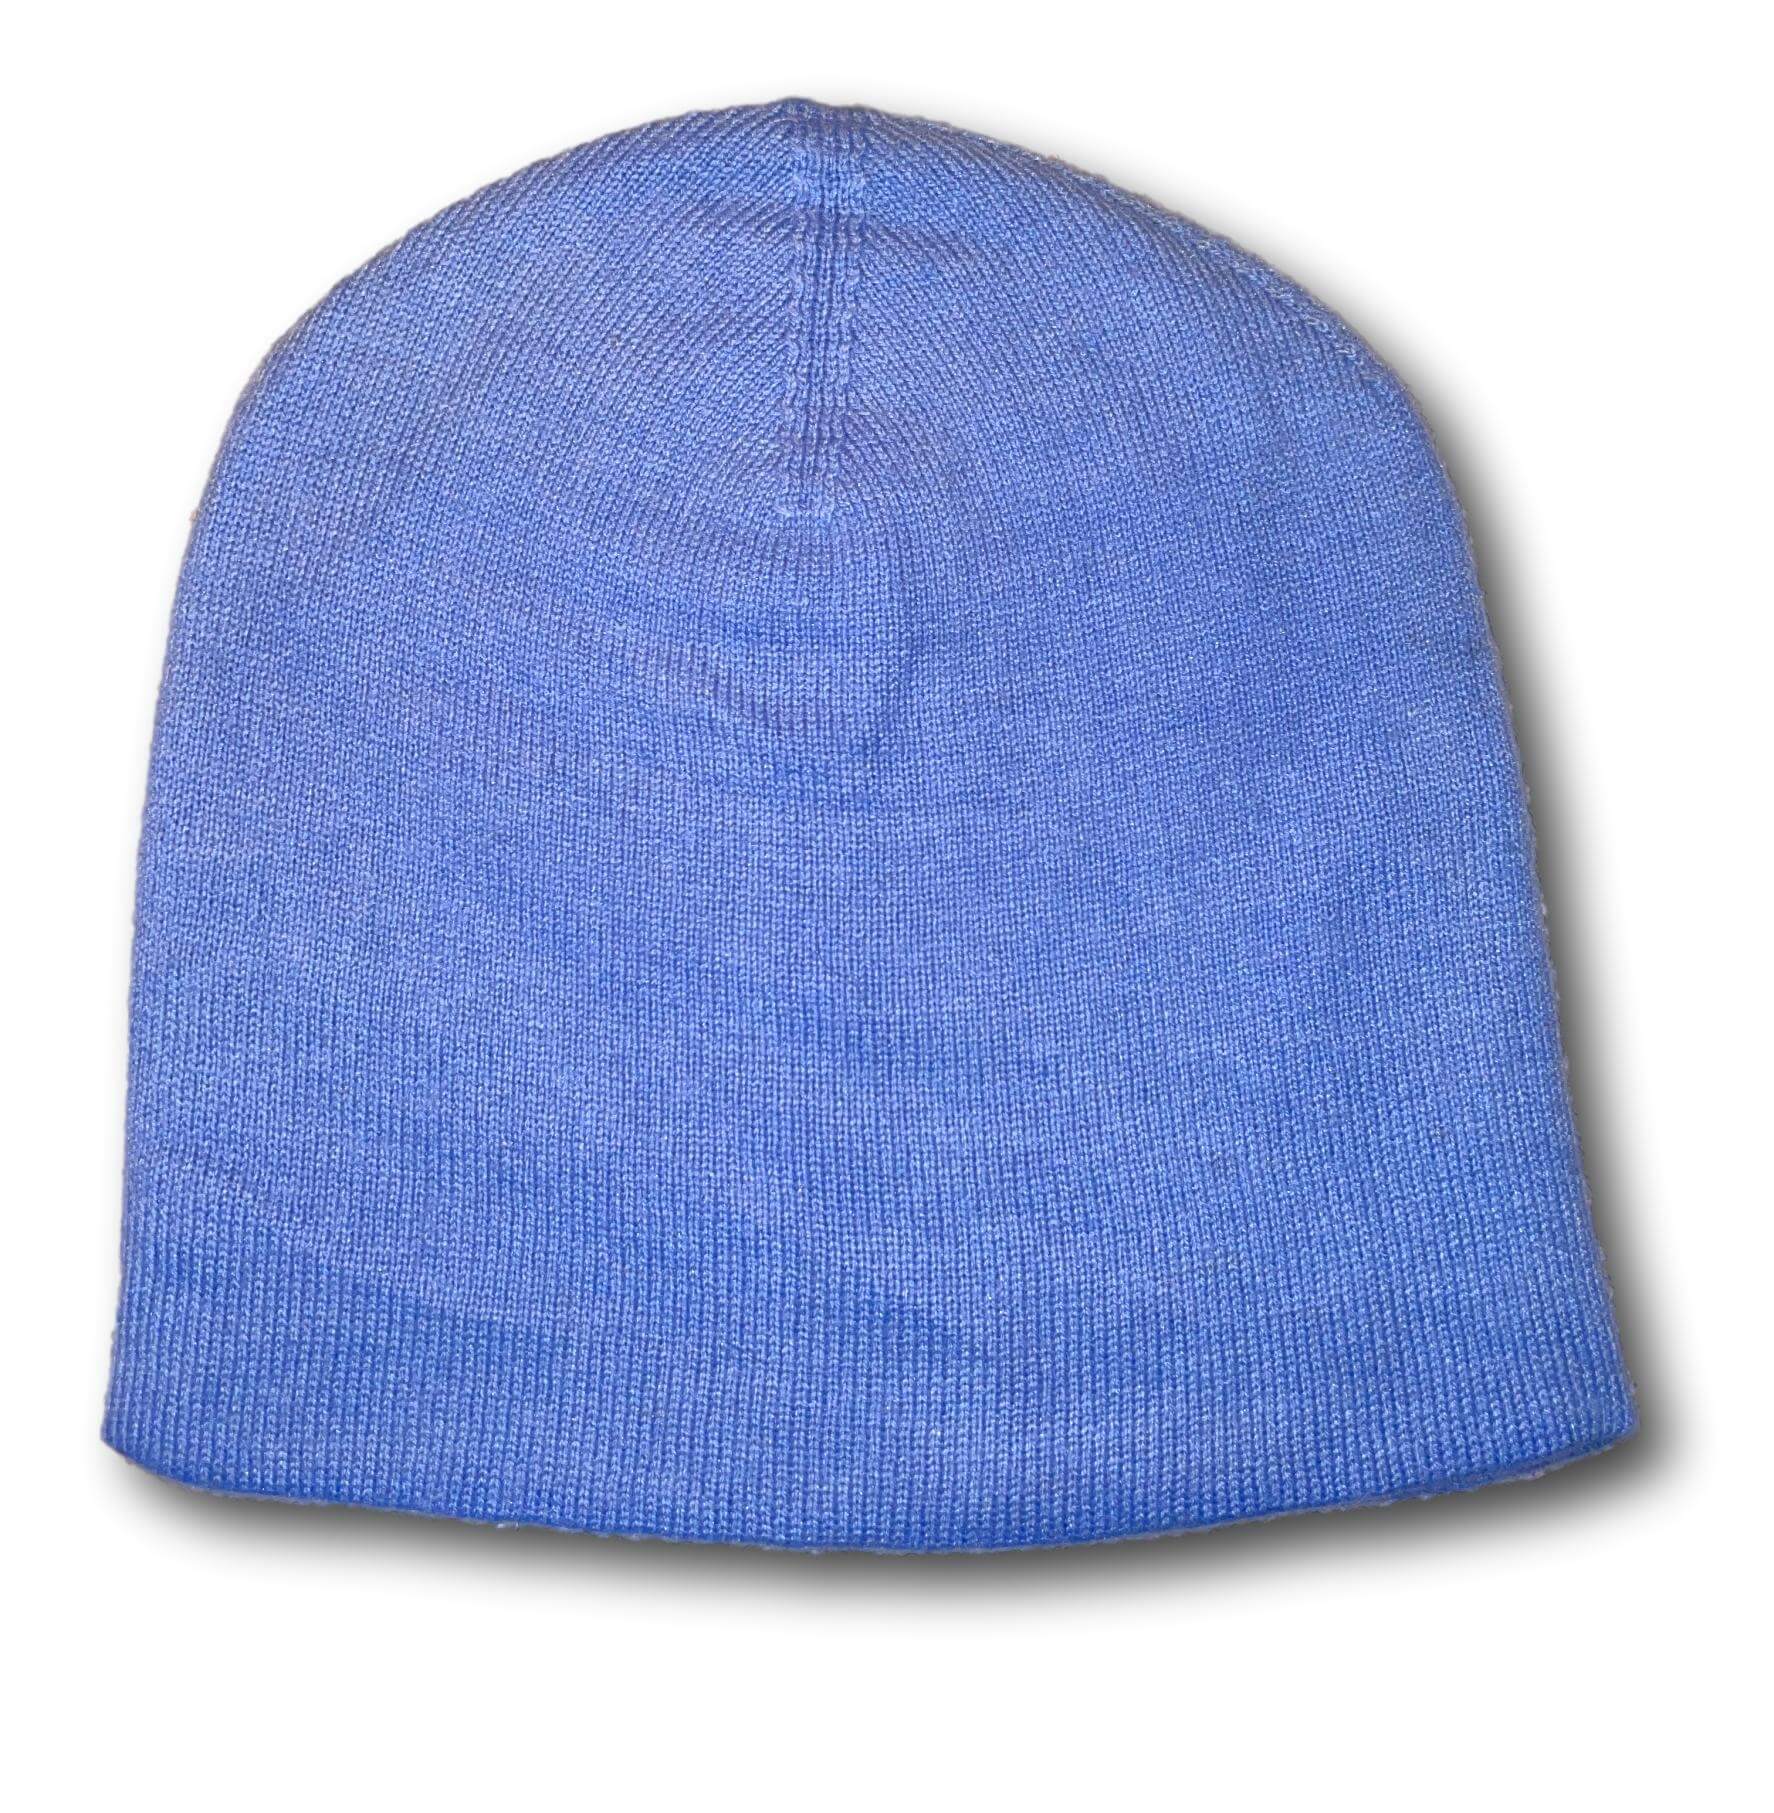 A$49 - CASHMERE BEANIE - HAND MADE IN NEPAL 🇳🇵 UNISEX & ONE SIZE FITS MOST BLACK 0.3KG (1) ISLAND BUDDHA